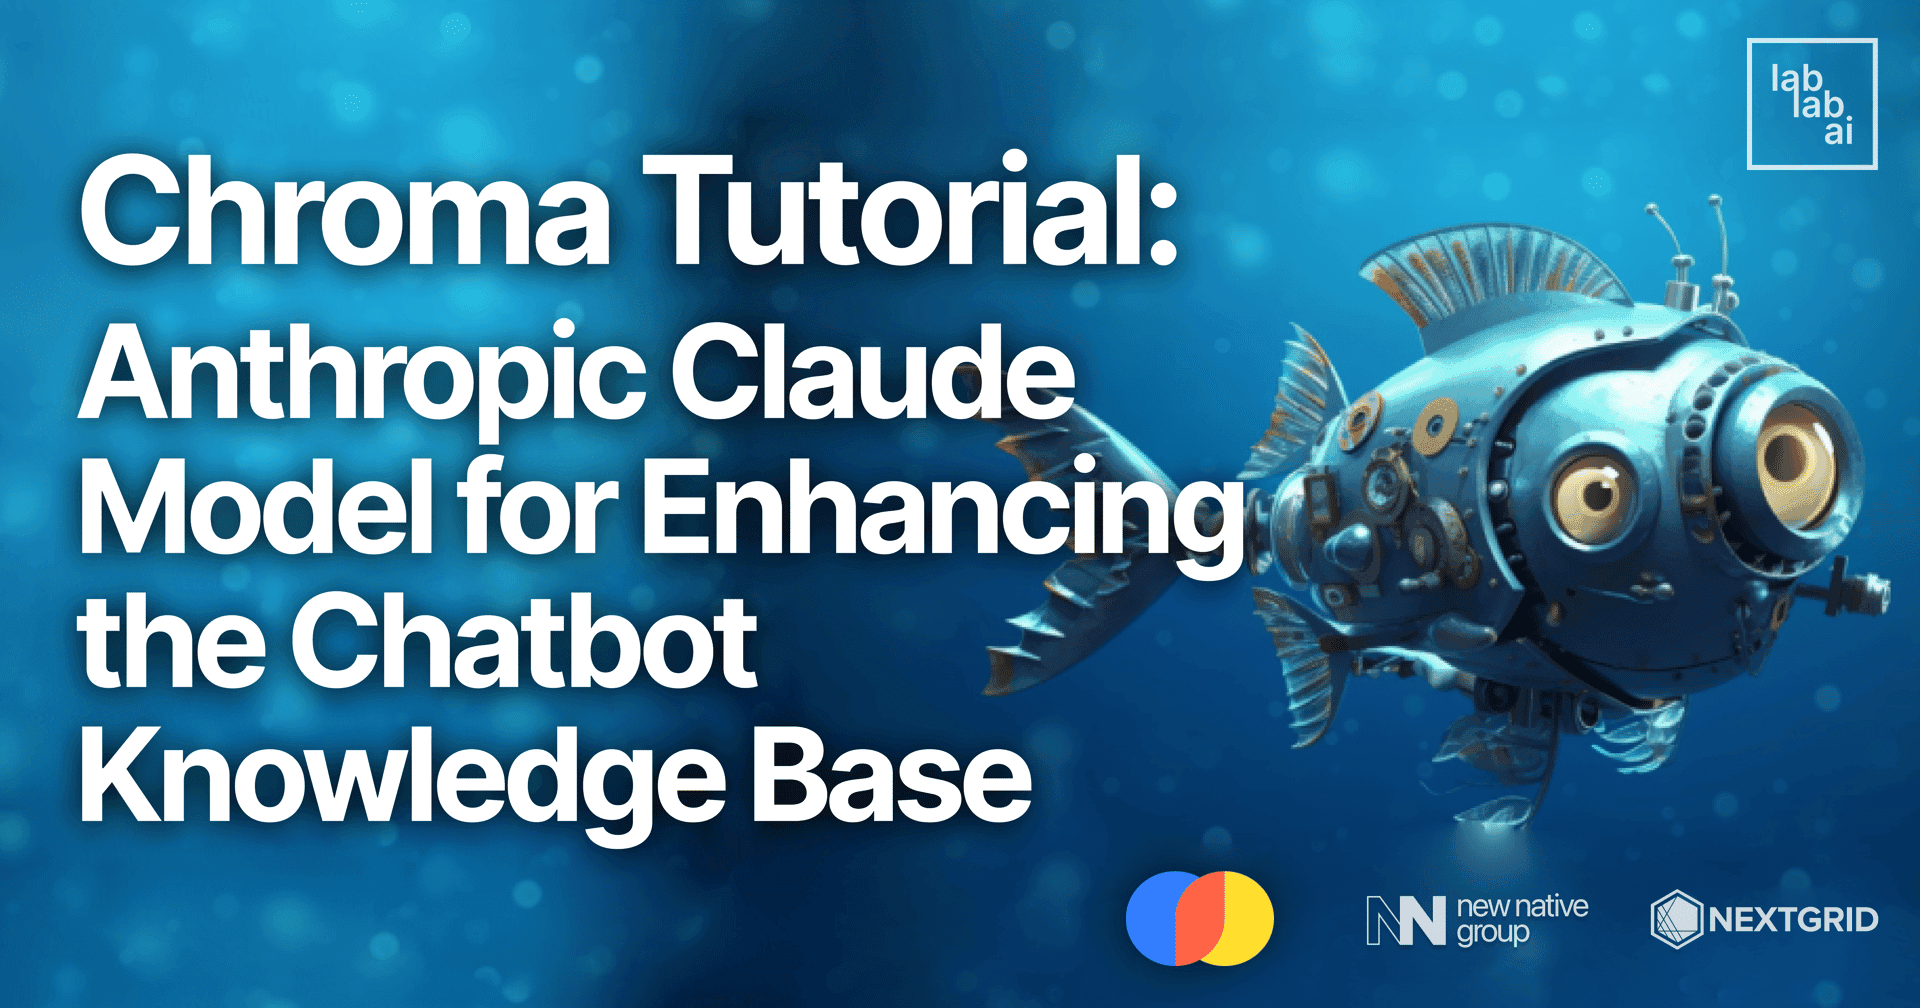 Chroma Tutorial: Anthropic Claude Model for Enhancing the Chatbot Knowledge Base